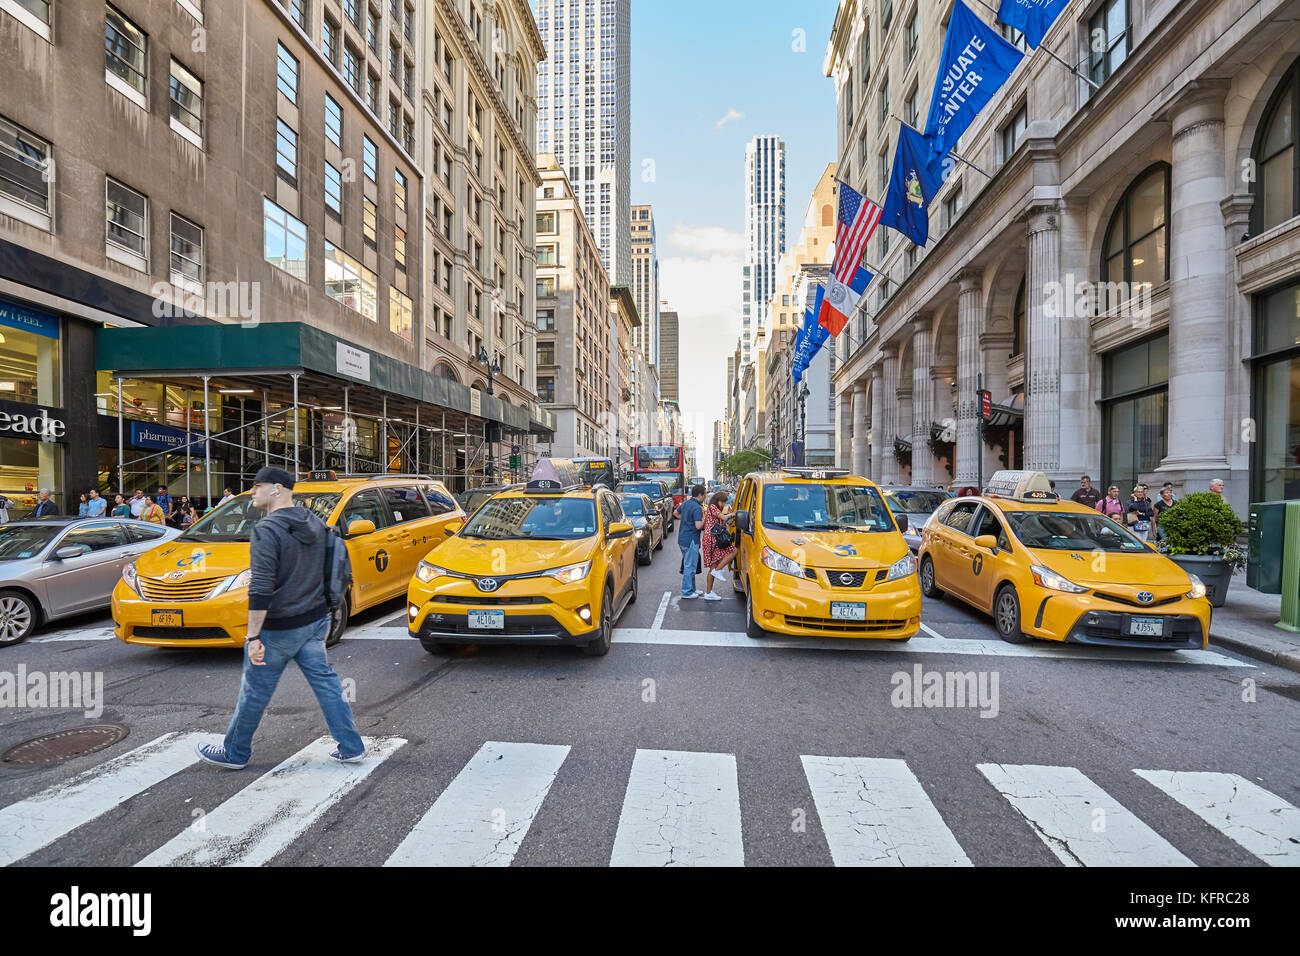 New York, USA - May 26, 2017: Yellow cabs waiting in front of a pedestrian crossing during rush hour. Stock Photo